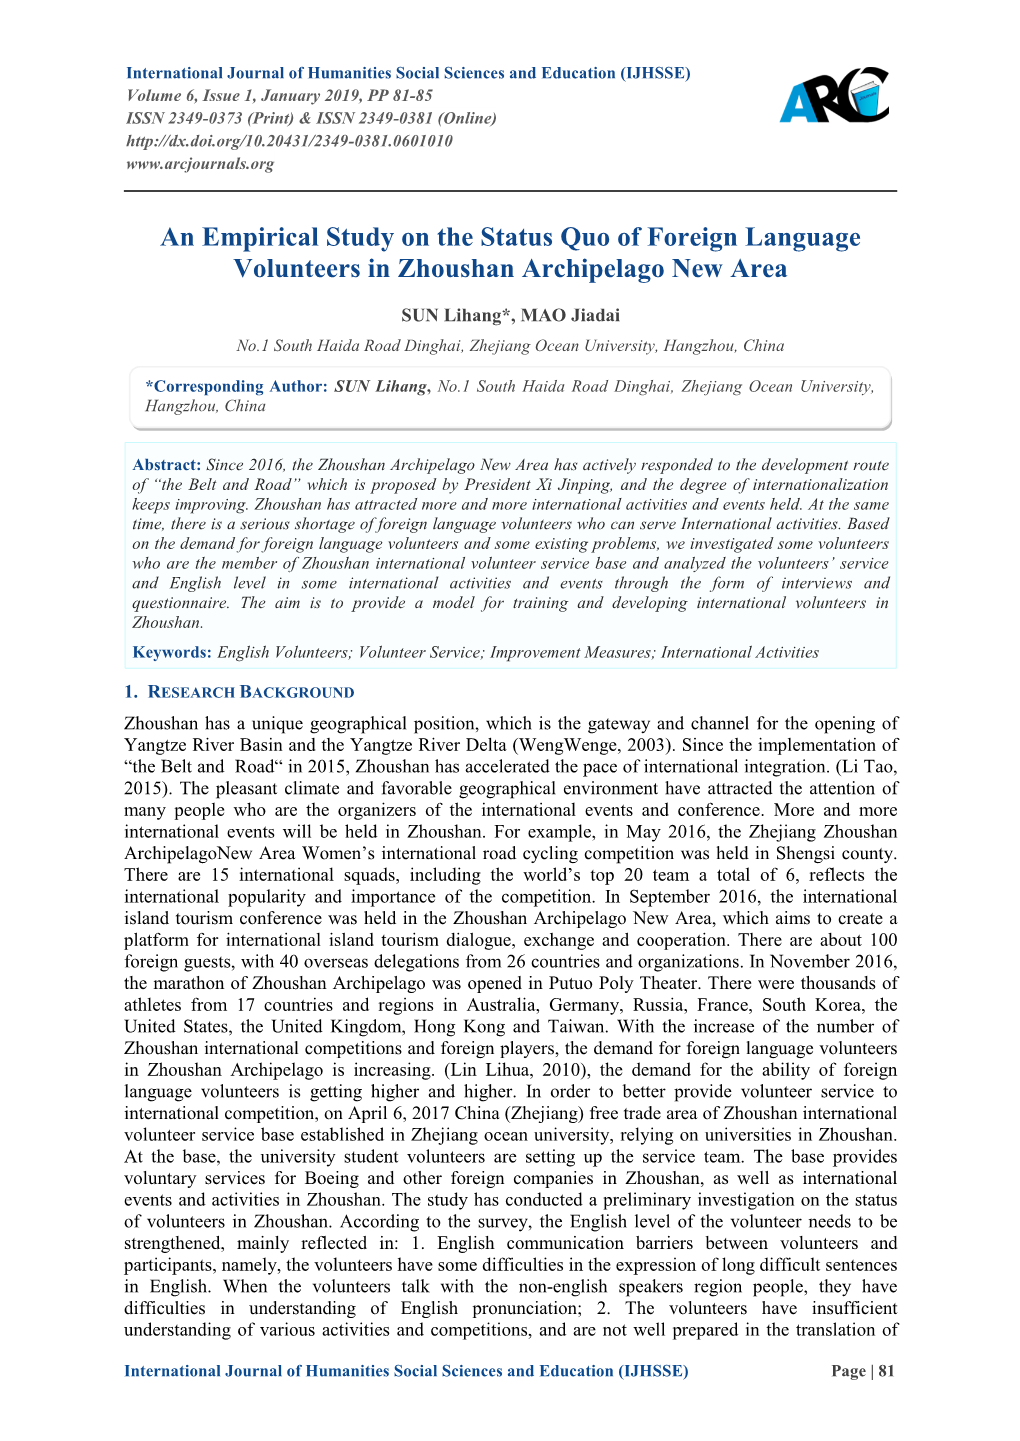 An Empirical Study on the Status Quo of Foreign Language Volunteers in Zhoushan Archipelago New Area